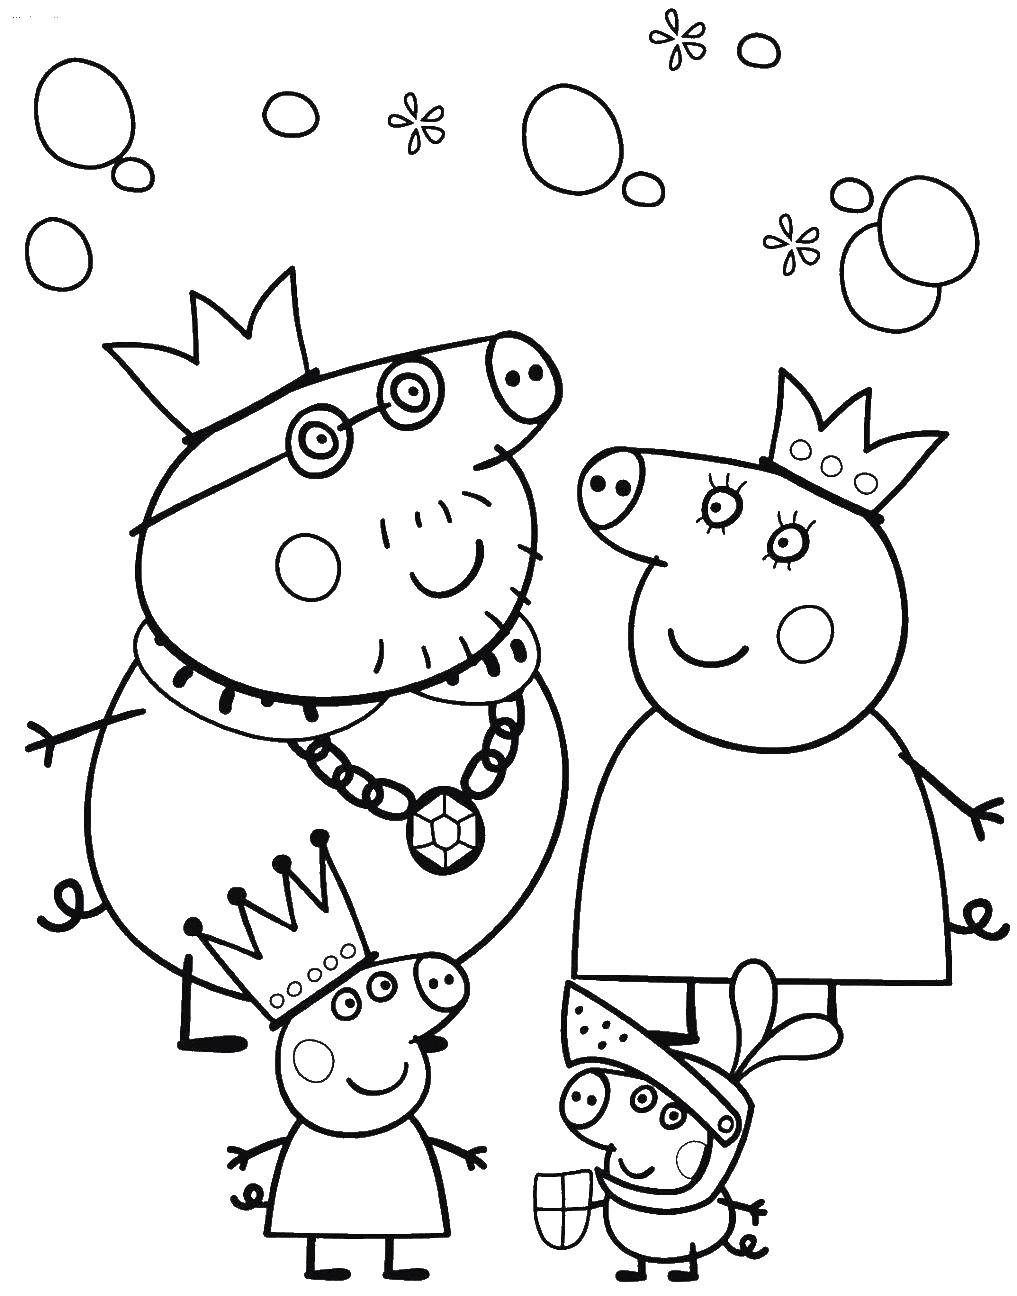 Coloring Family in peppa. Category Cartoon character. Tags:  Cartoon character, Peppa Pig.